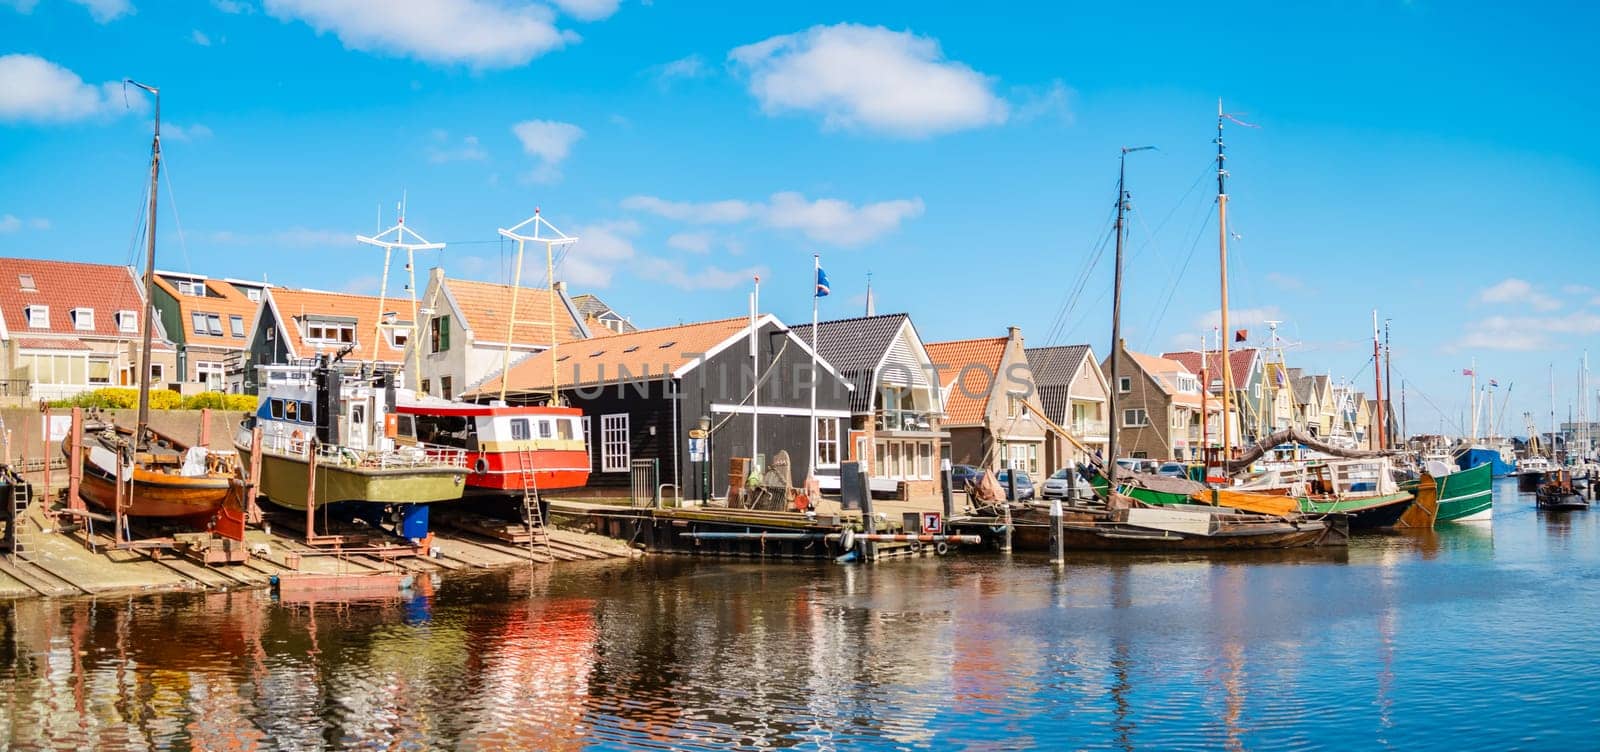 fishing boats at the old historical harbor of Urk Netherlands